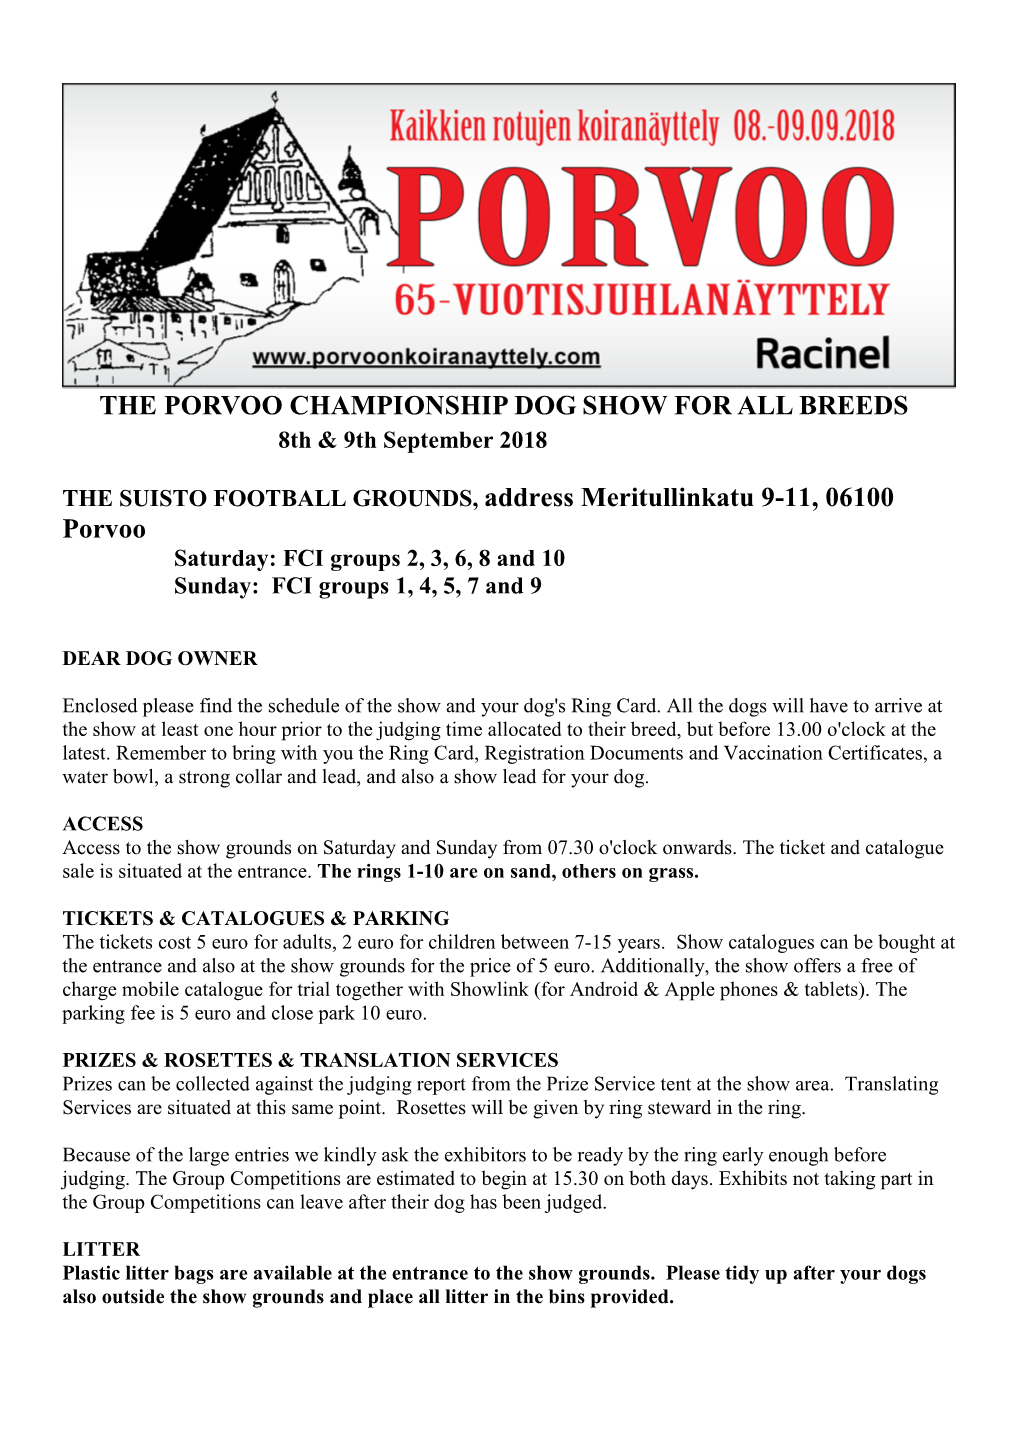 PORVOO CHAMPIONSHIP DOG SHOW for ALL BREEDS 8Th & 9Th September 2018